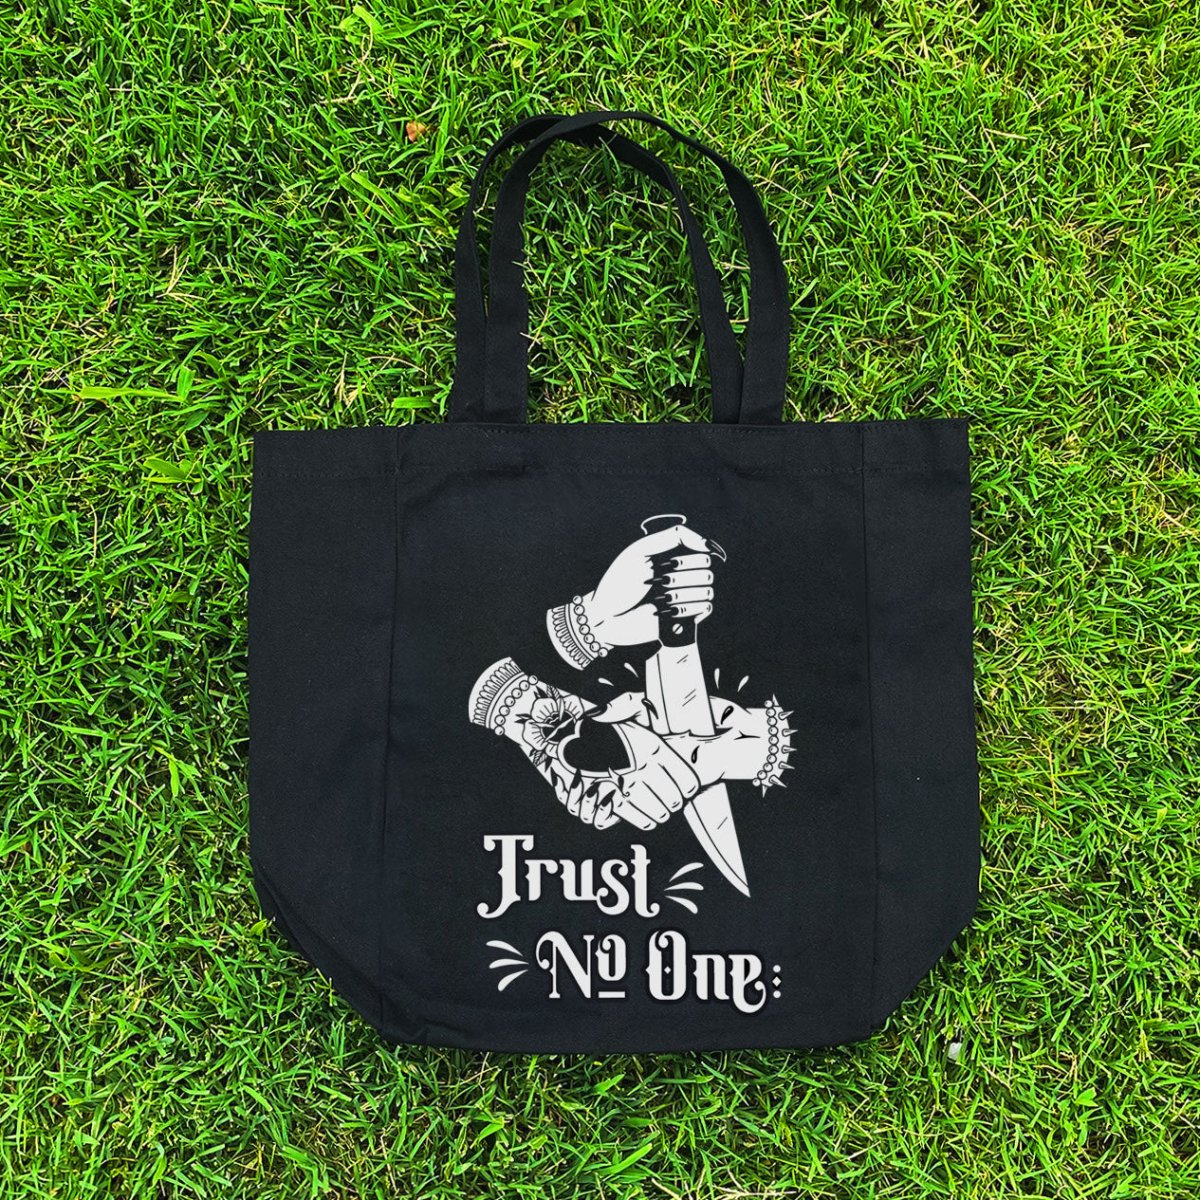 Too Fast | Trust No One Canvas Tote Bag